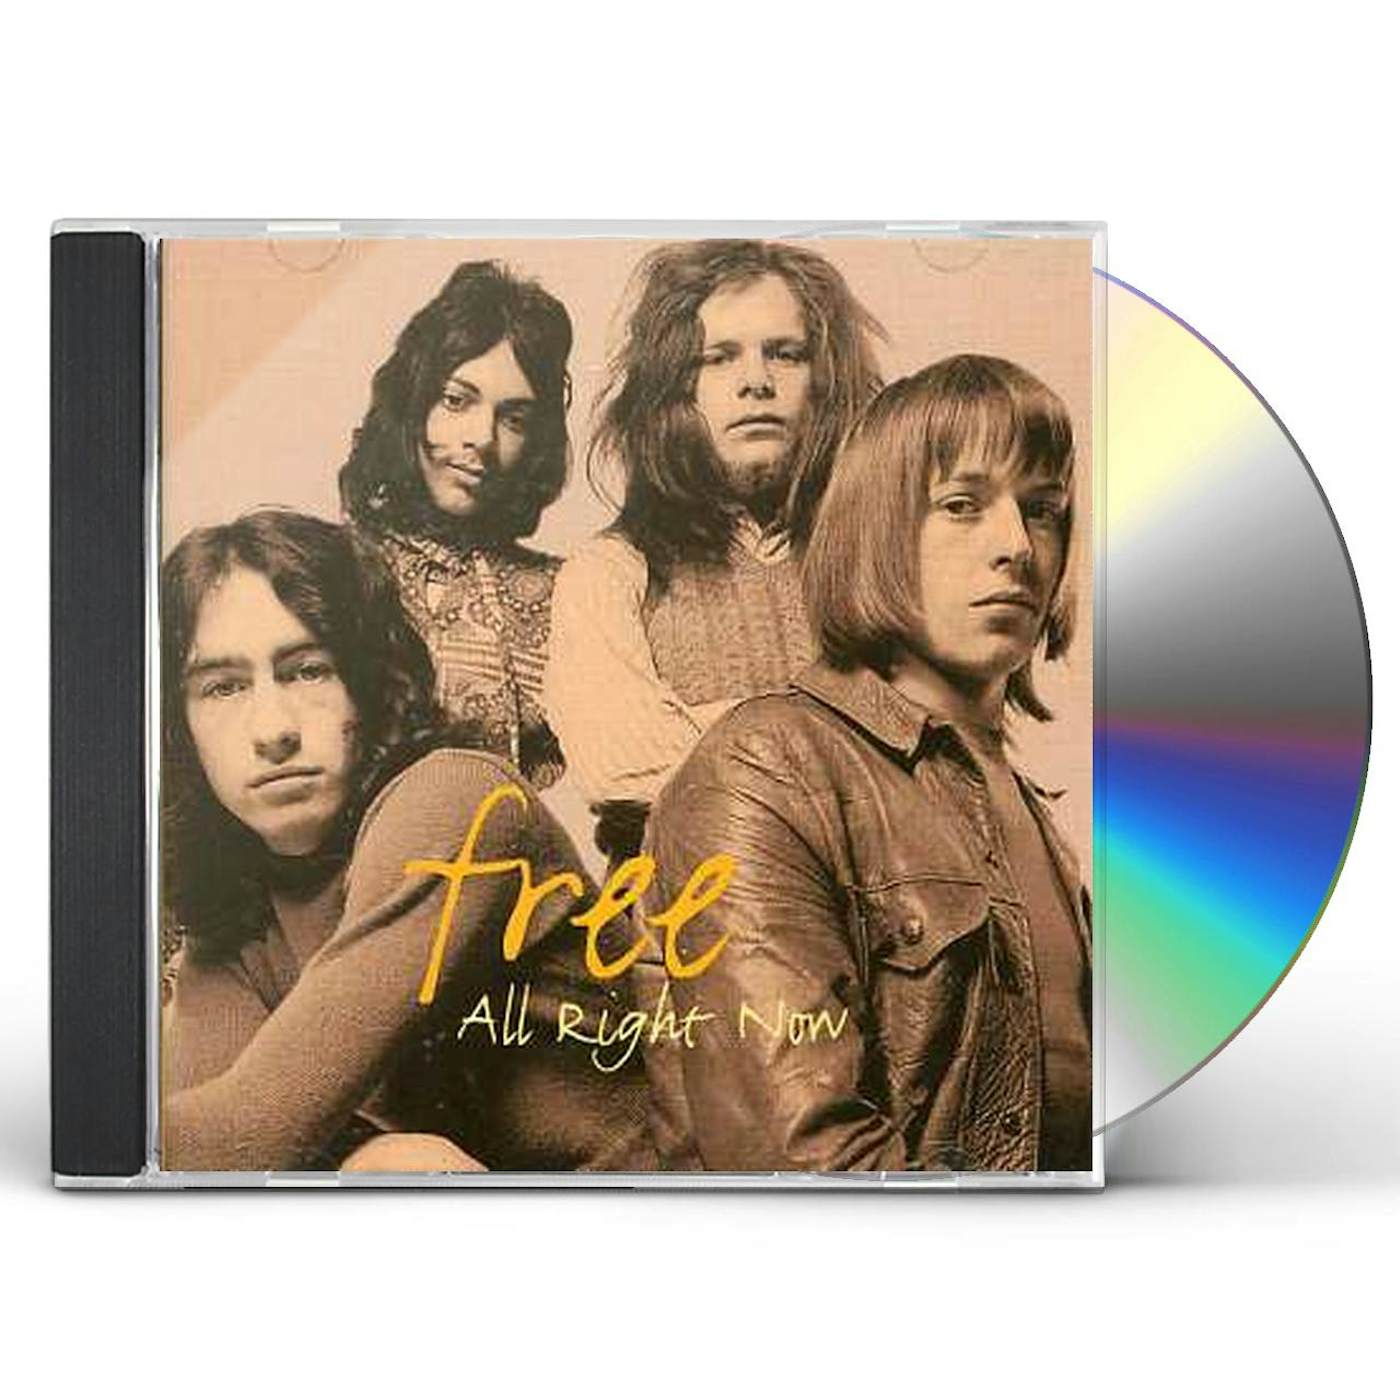 Free ALL RIGHT NOW CD